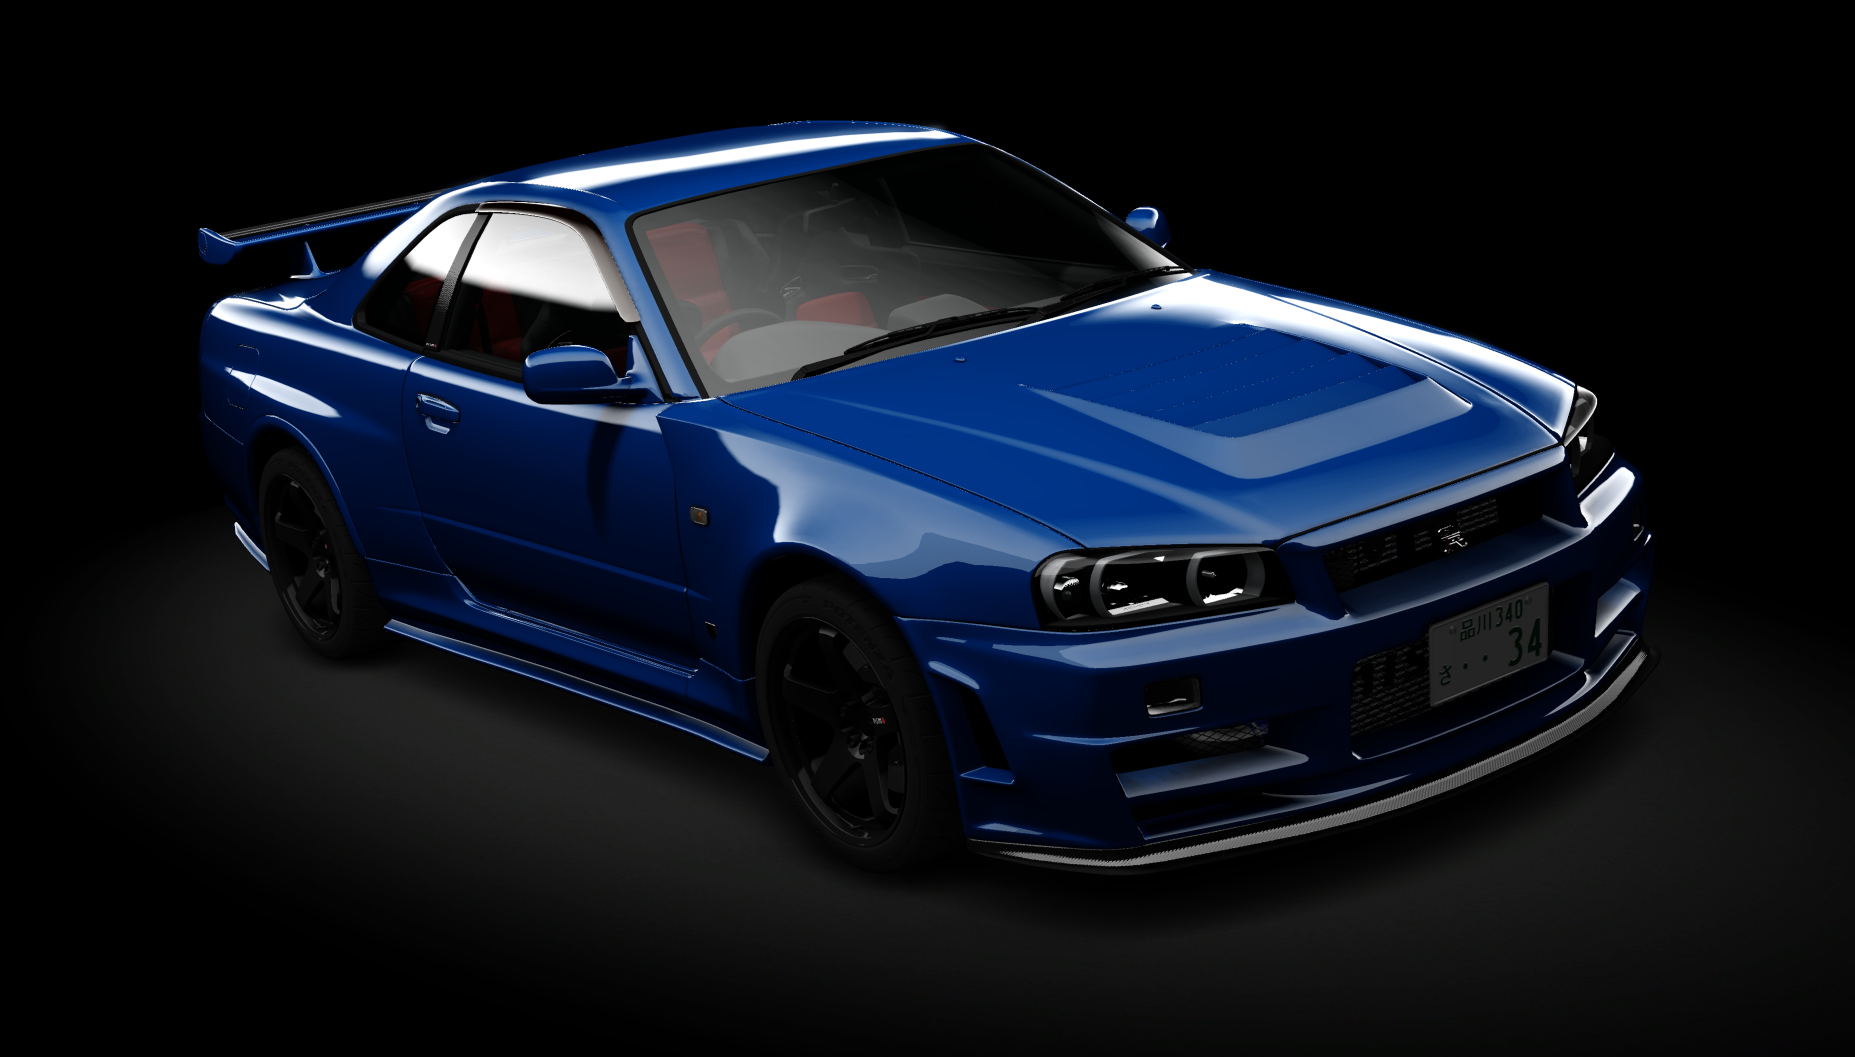 Nissan Skyline GT-R R34 Z-Tune Preview Image